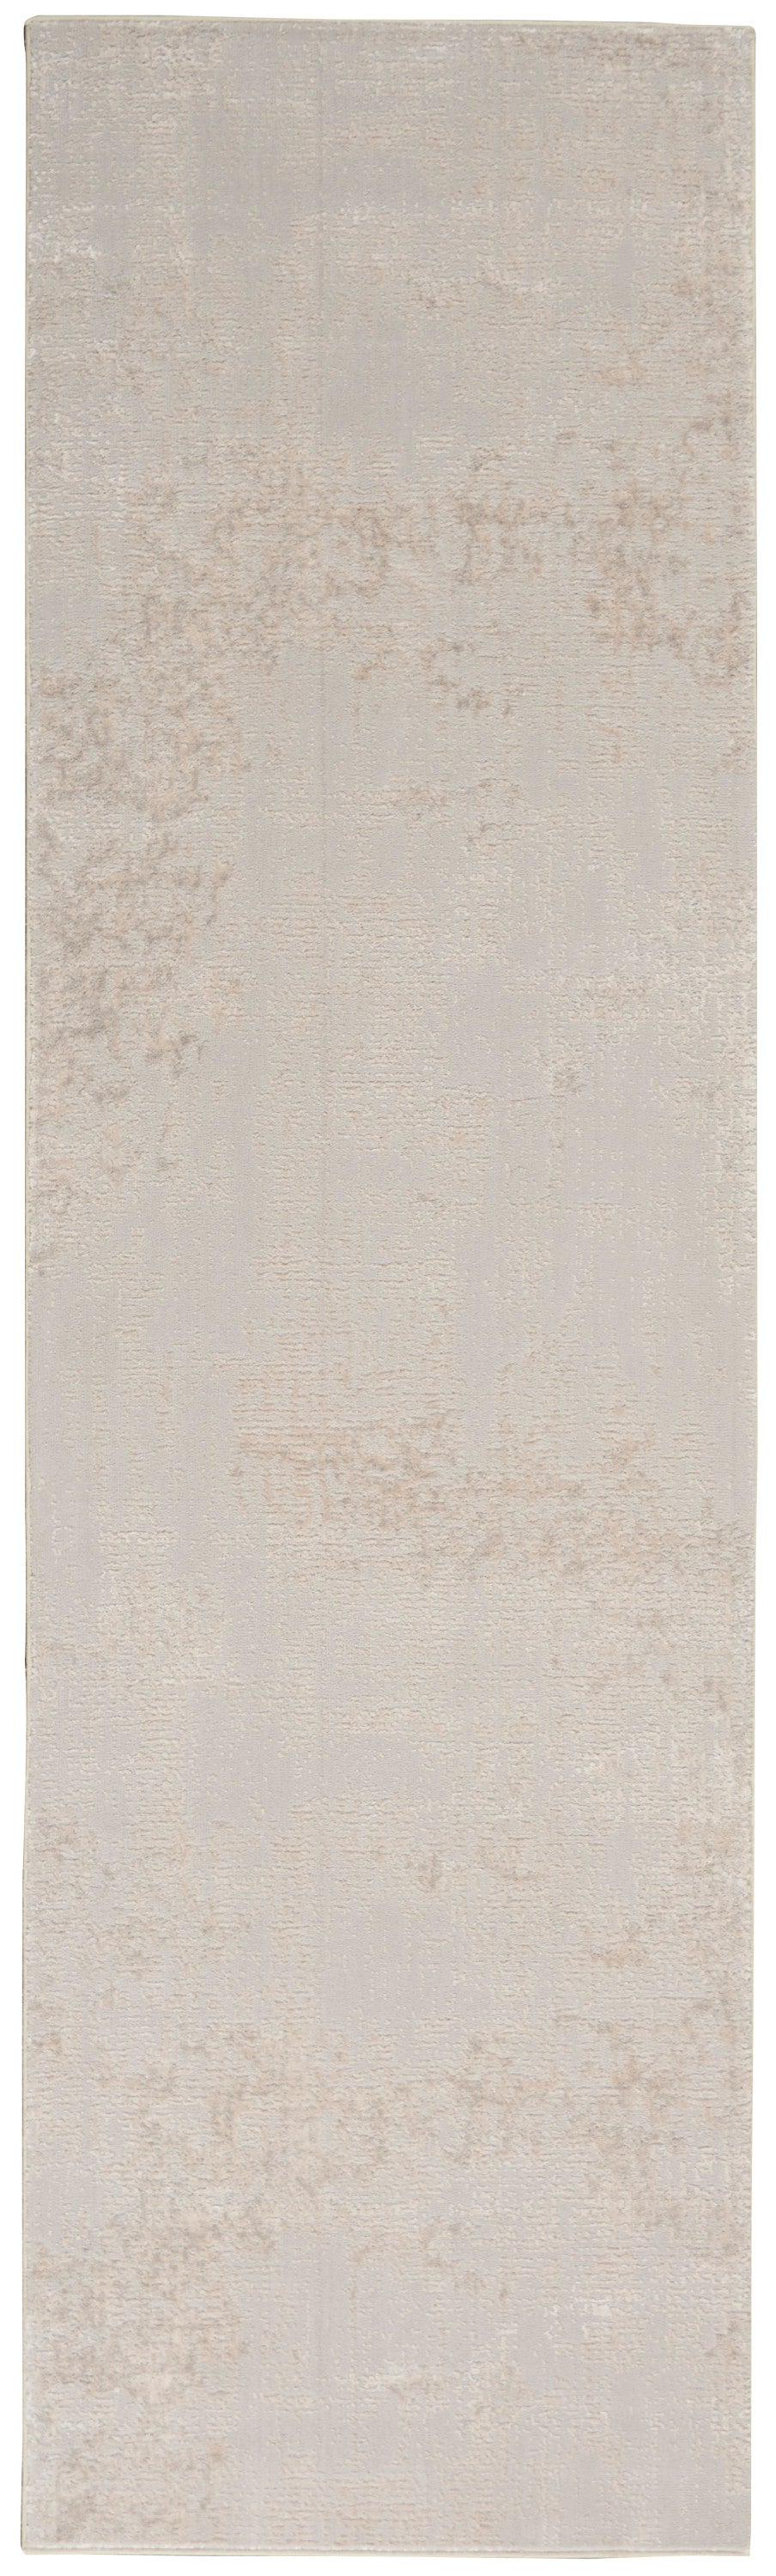 Nourison Home Silky Textures SLY01 Ivory Grey Contemporary Machinemade Rug